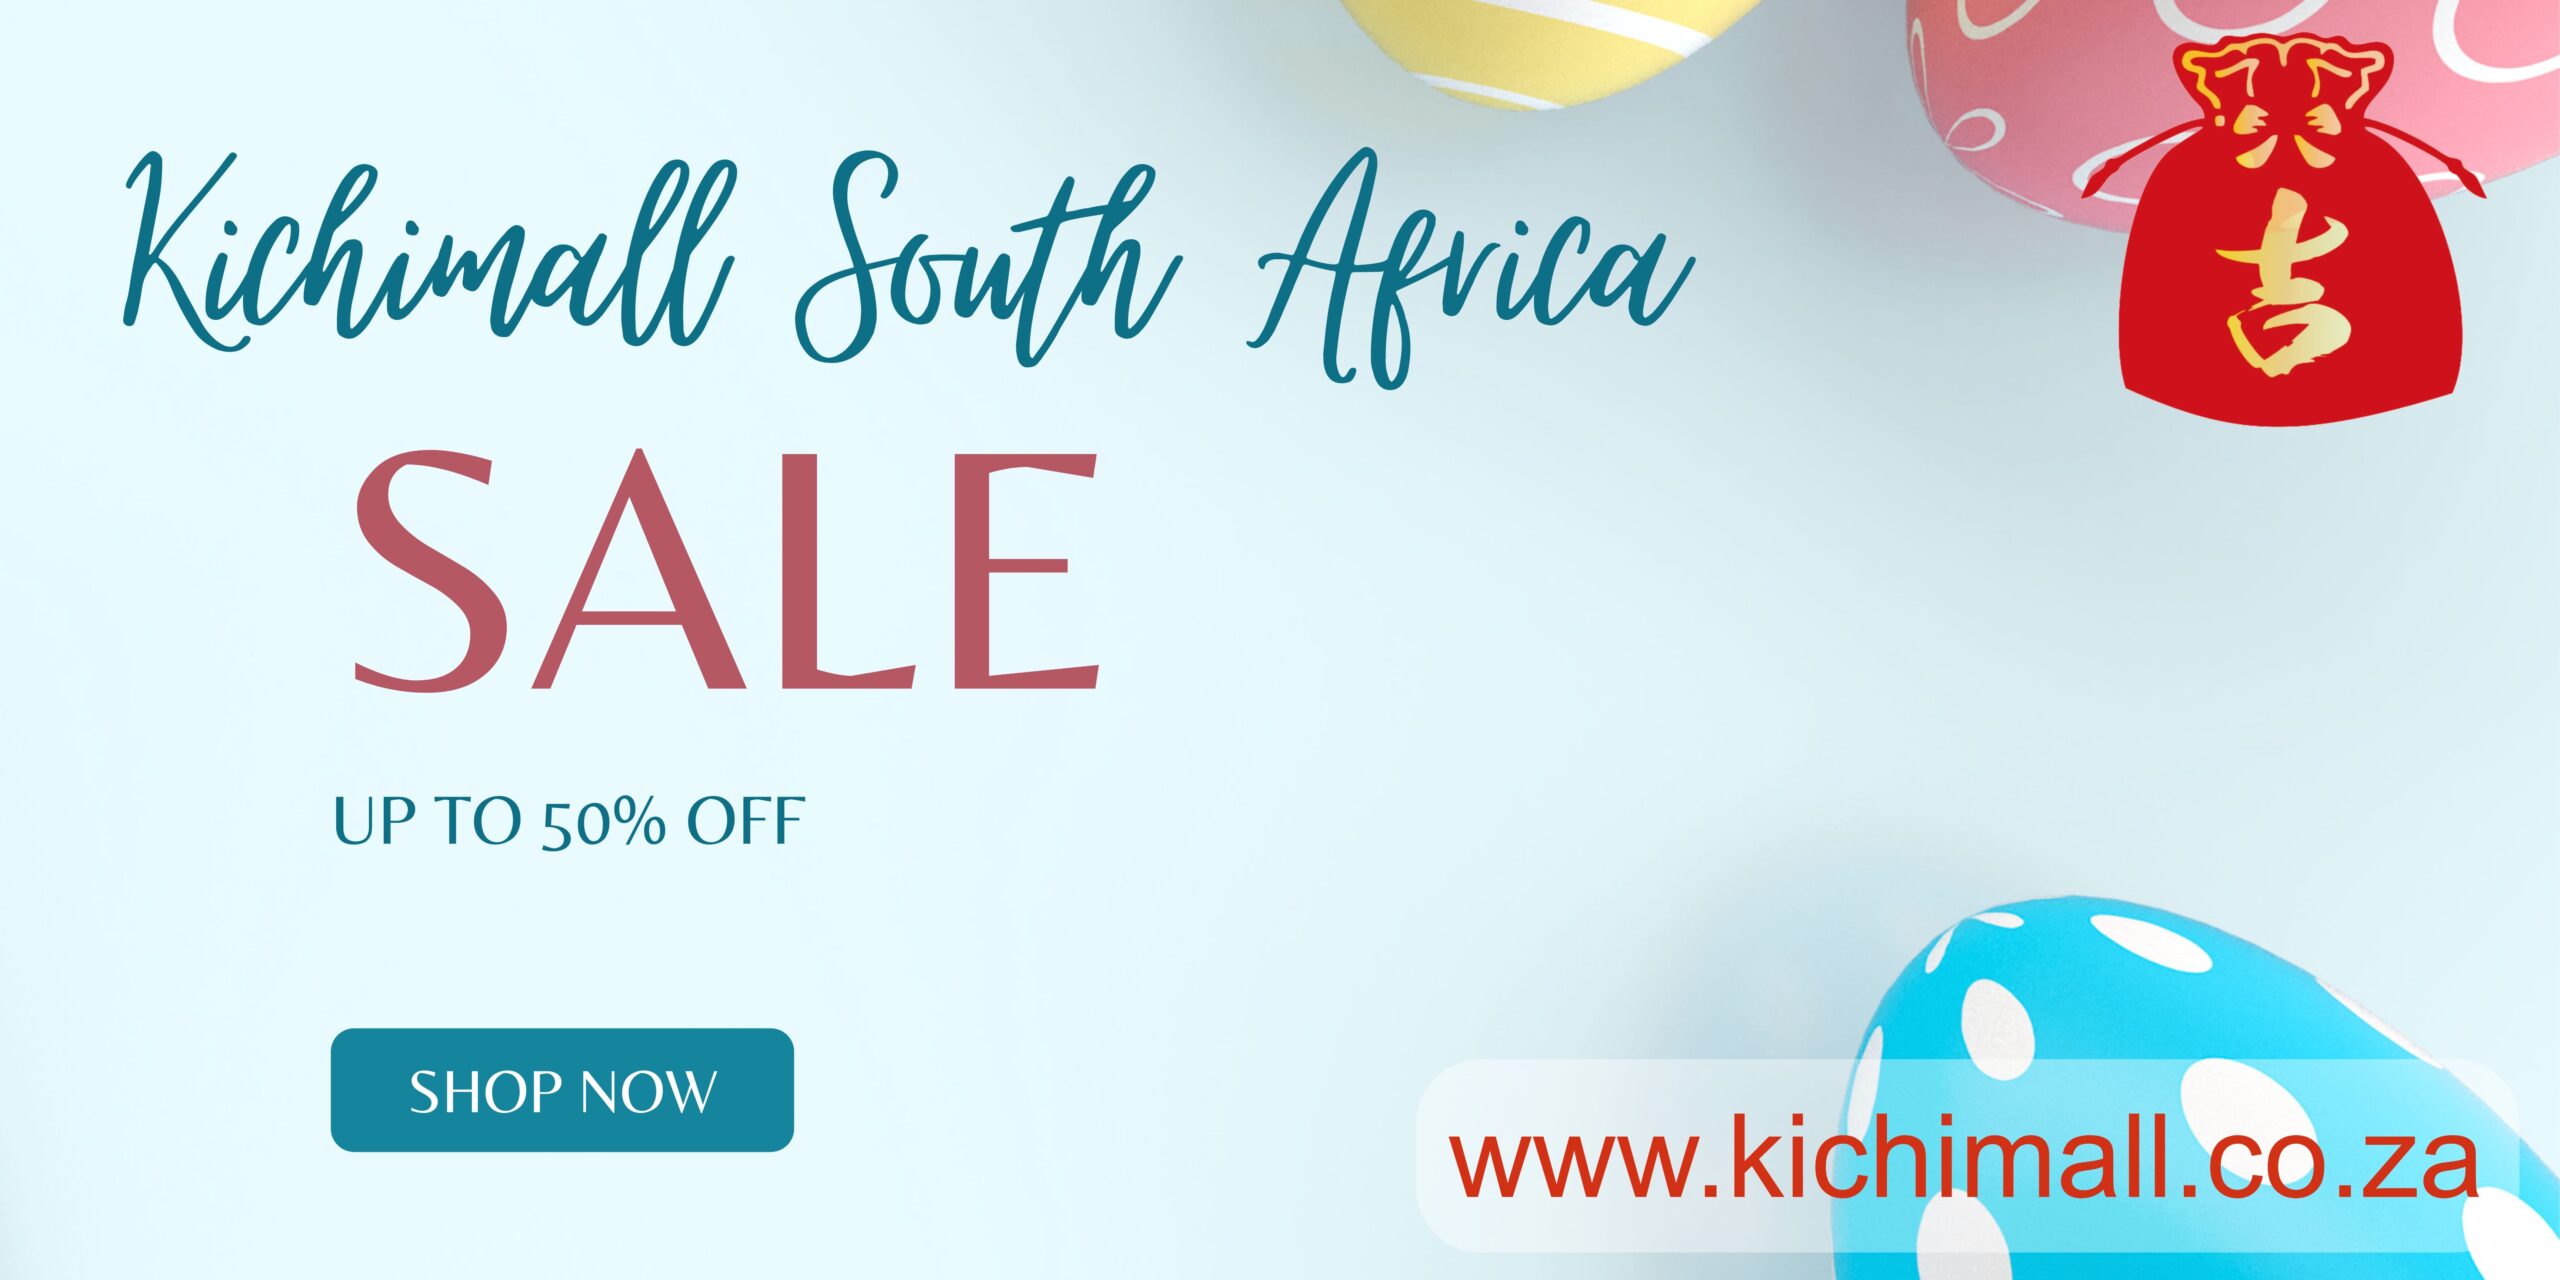 online shopping South Africa